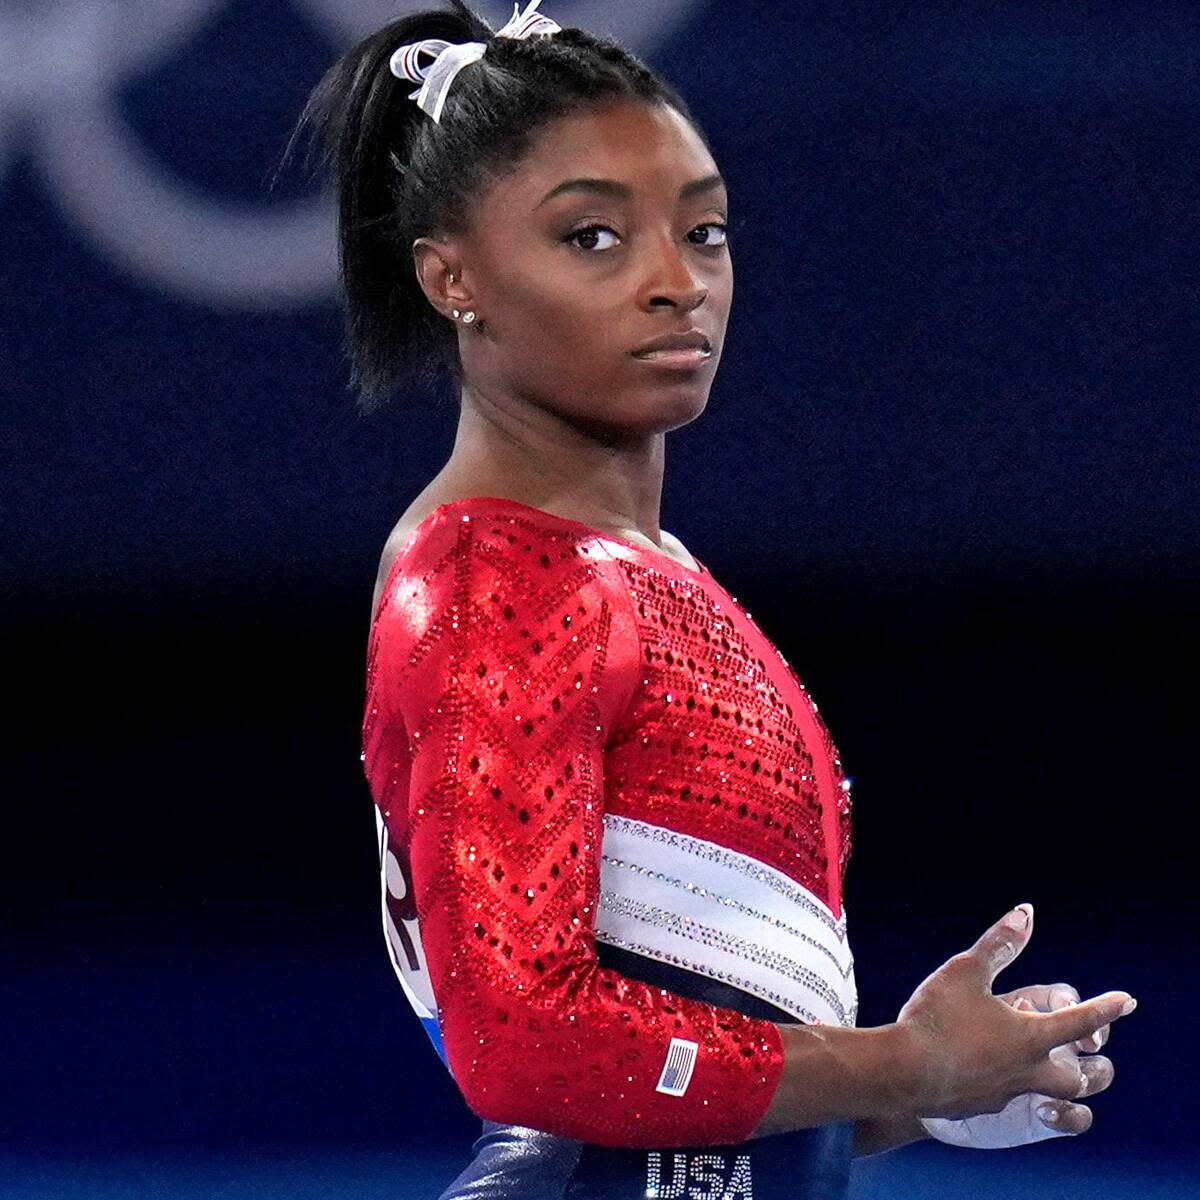 Simone Biles Reacts to Claim She "Quit" the 2020 Tokyo Olympics